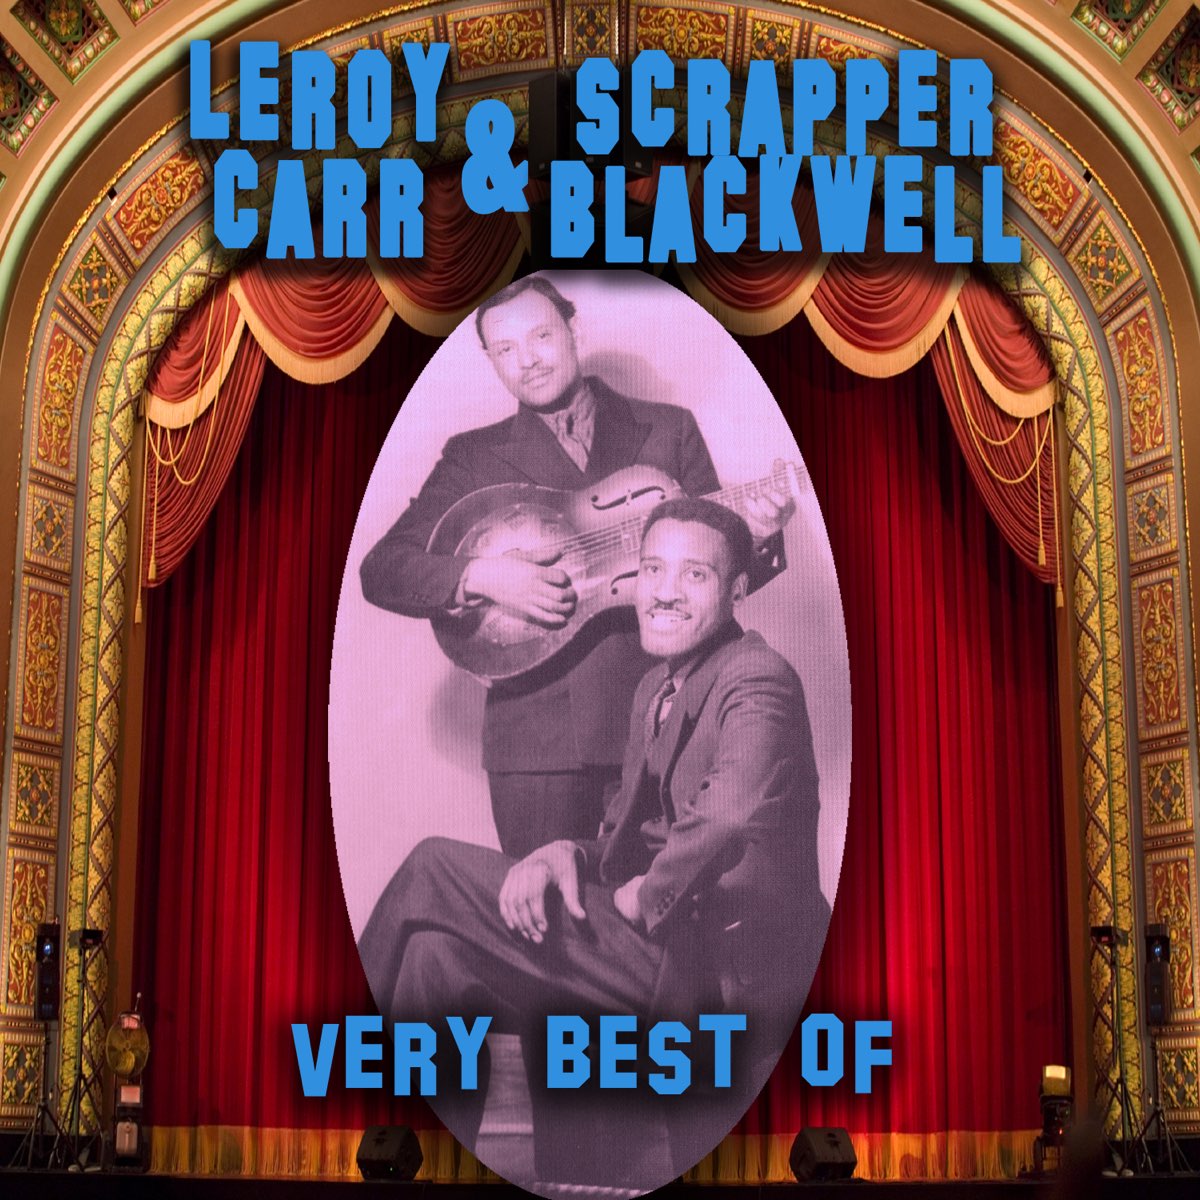 The Very Best Of - Album by Scrapper Blackwell & Leroy Carr - Apple Music